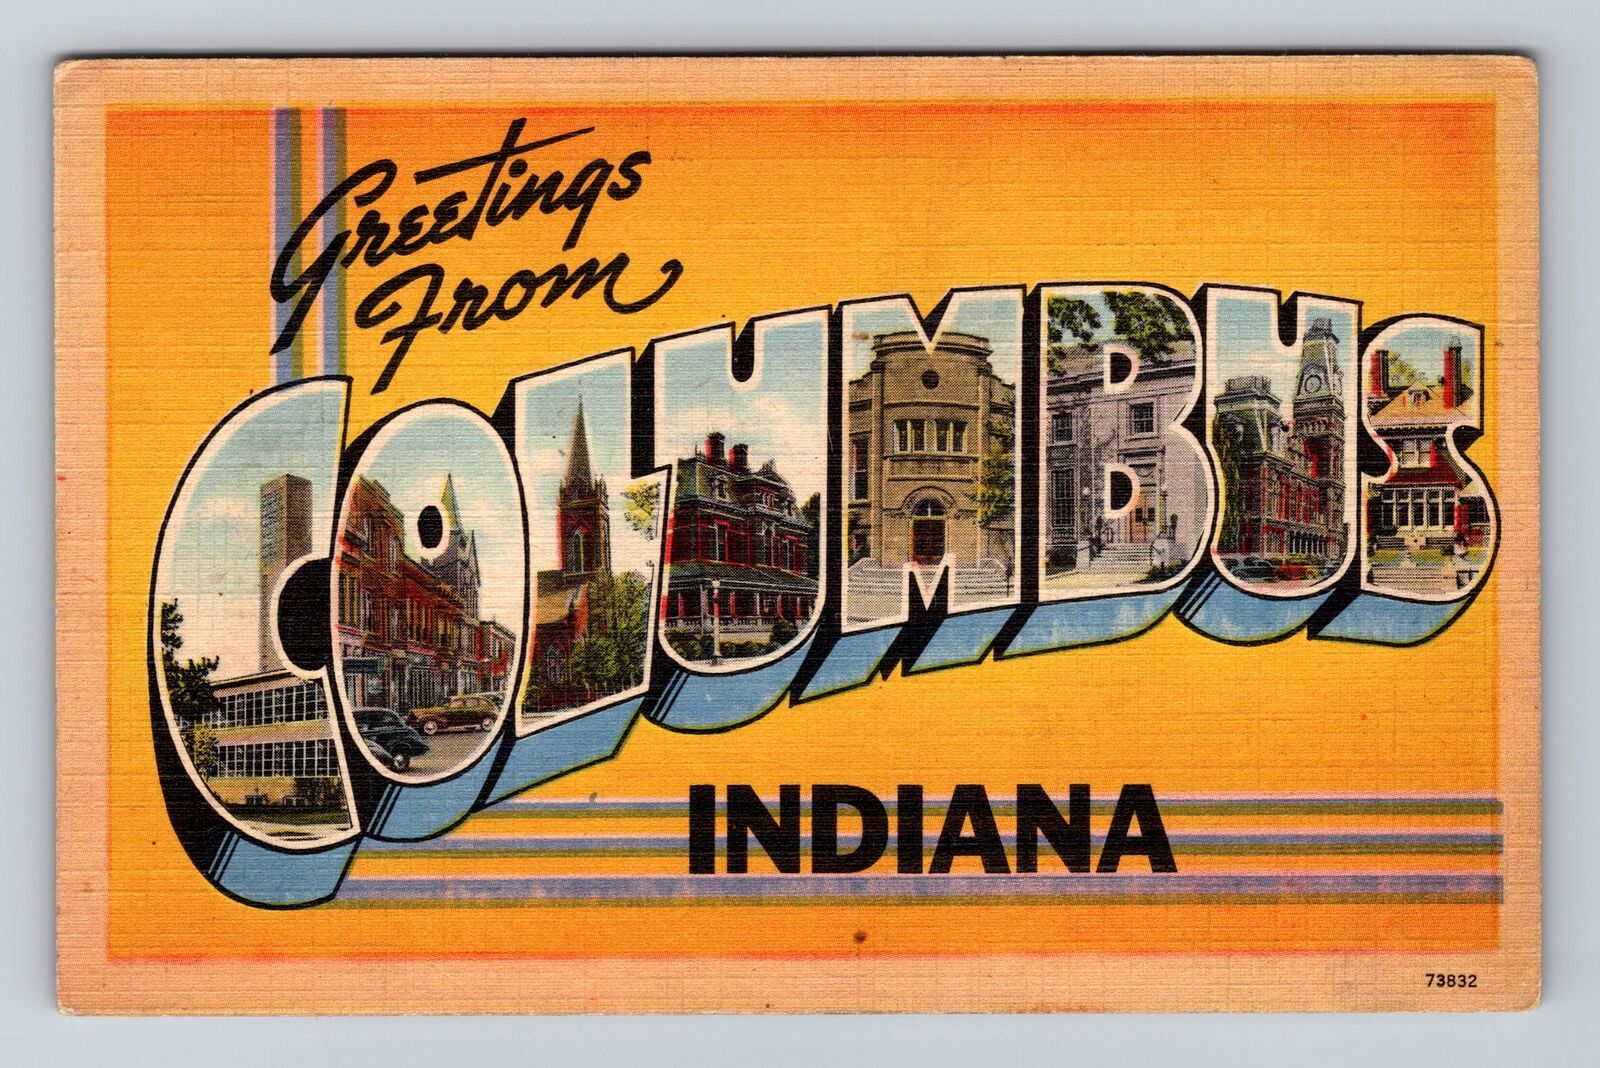 Columbus IN-Indiana, LARGE LETTER Greetings, Points Of Interest Vintage Postcard